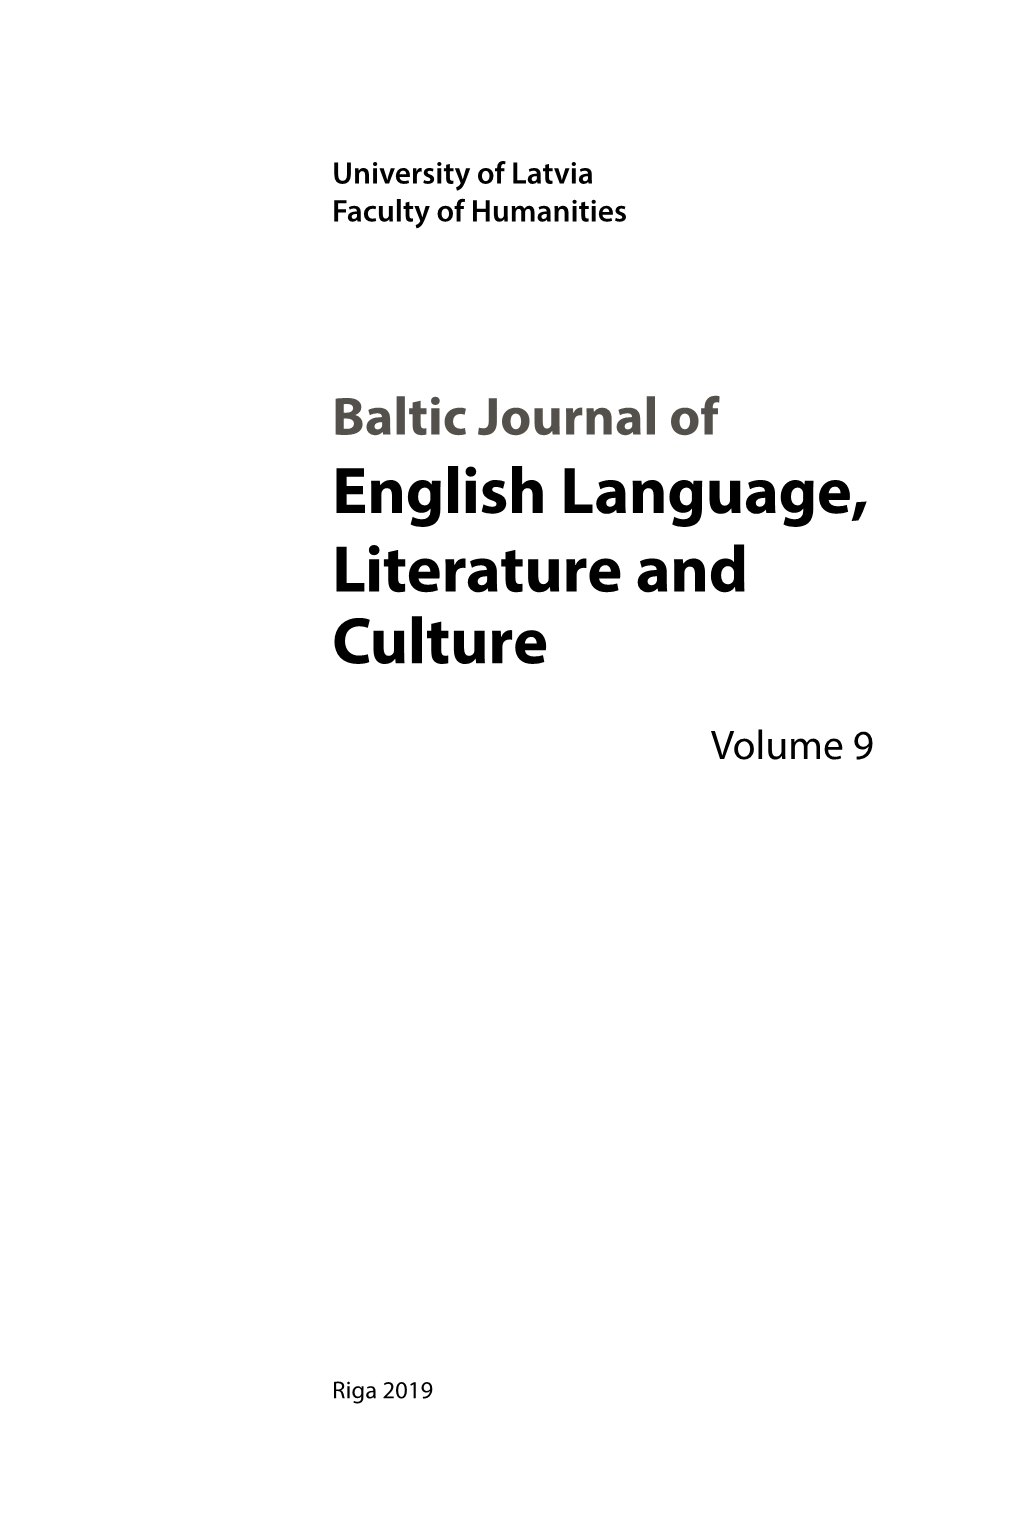 Baltic Journal of English Language, Literature and Culture